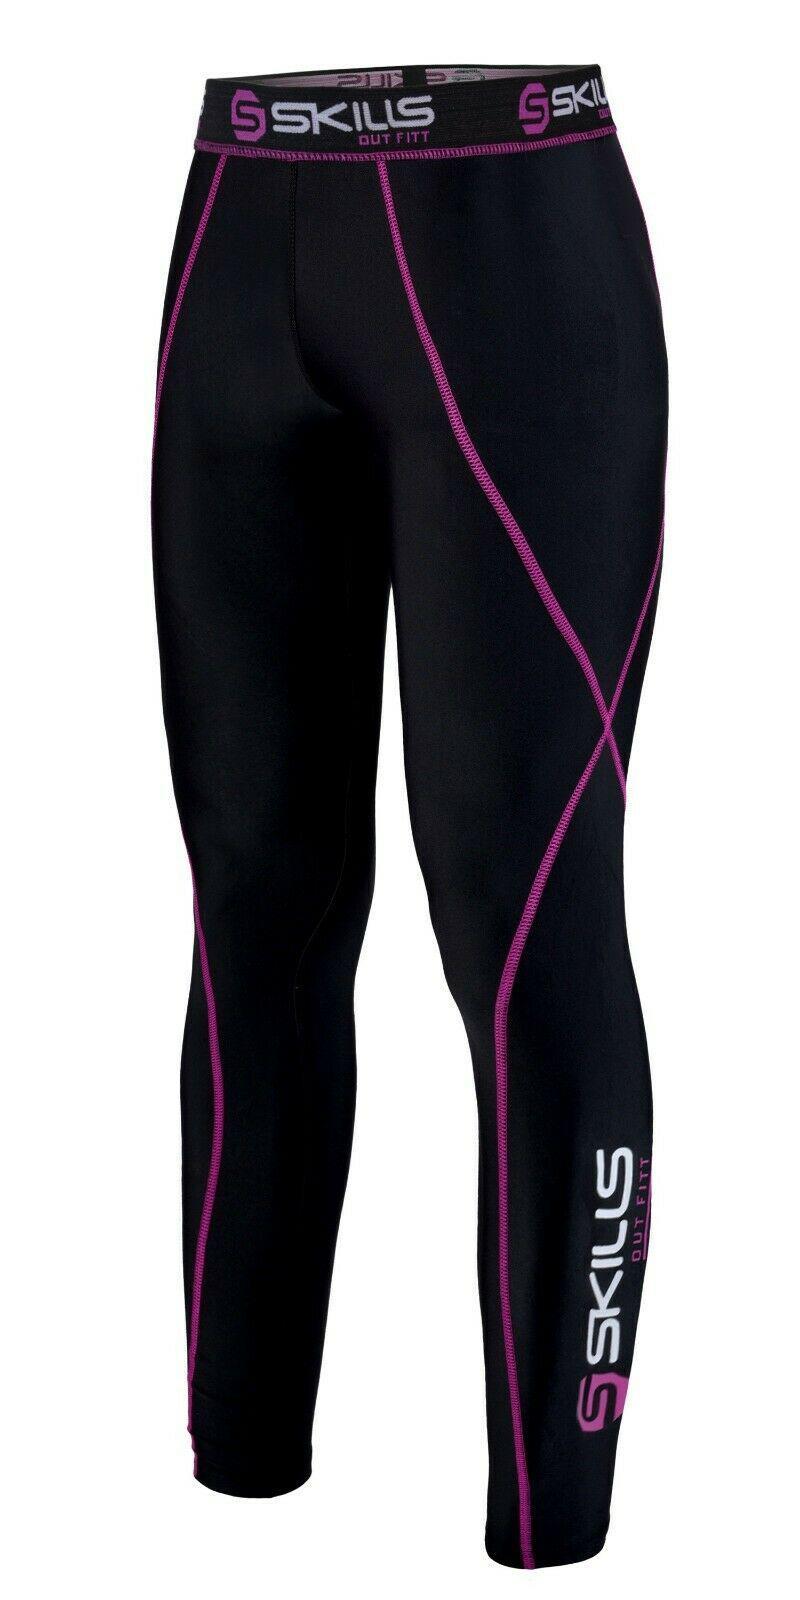 Skills Women's Compression Base Layer Tights, Pants, Skins Fitness, Running, Gym, Yoga